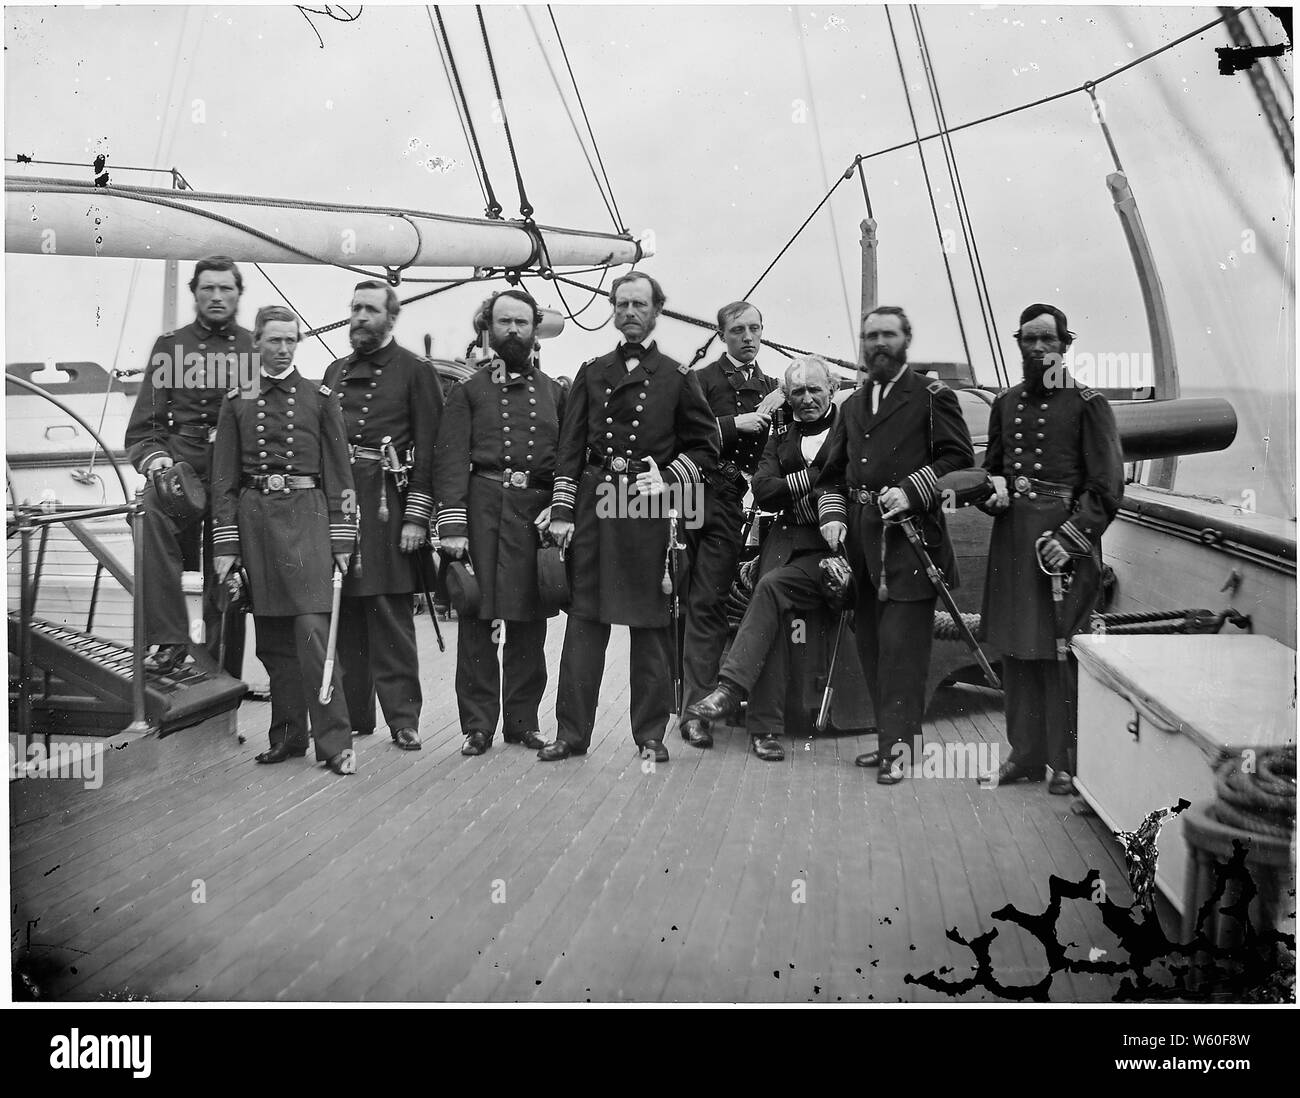 Admiral John A. Dahlgren and group. 1. Lieut. Commander E.J. Dichman, 2. Fleet Surgeon Wm. Johnson, 3. Paymaster J.H. Watmouth, 4. Commander J.M. Bradford, 5. Admiral Dahlgren, 6. Lieut. Commander E.O. Matthews; General notes:  Use War and Conflict Number 129 when ordering a reproduction or requesting information about this image. Stock Photo